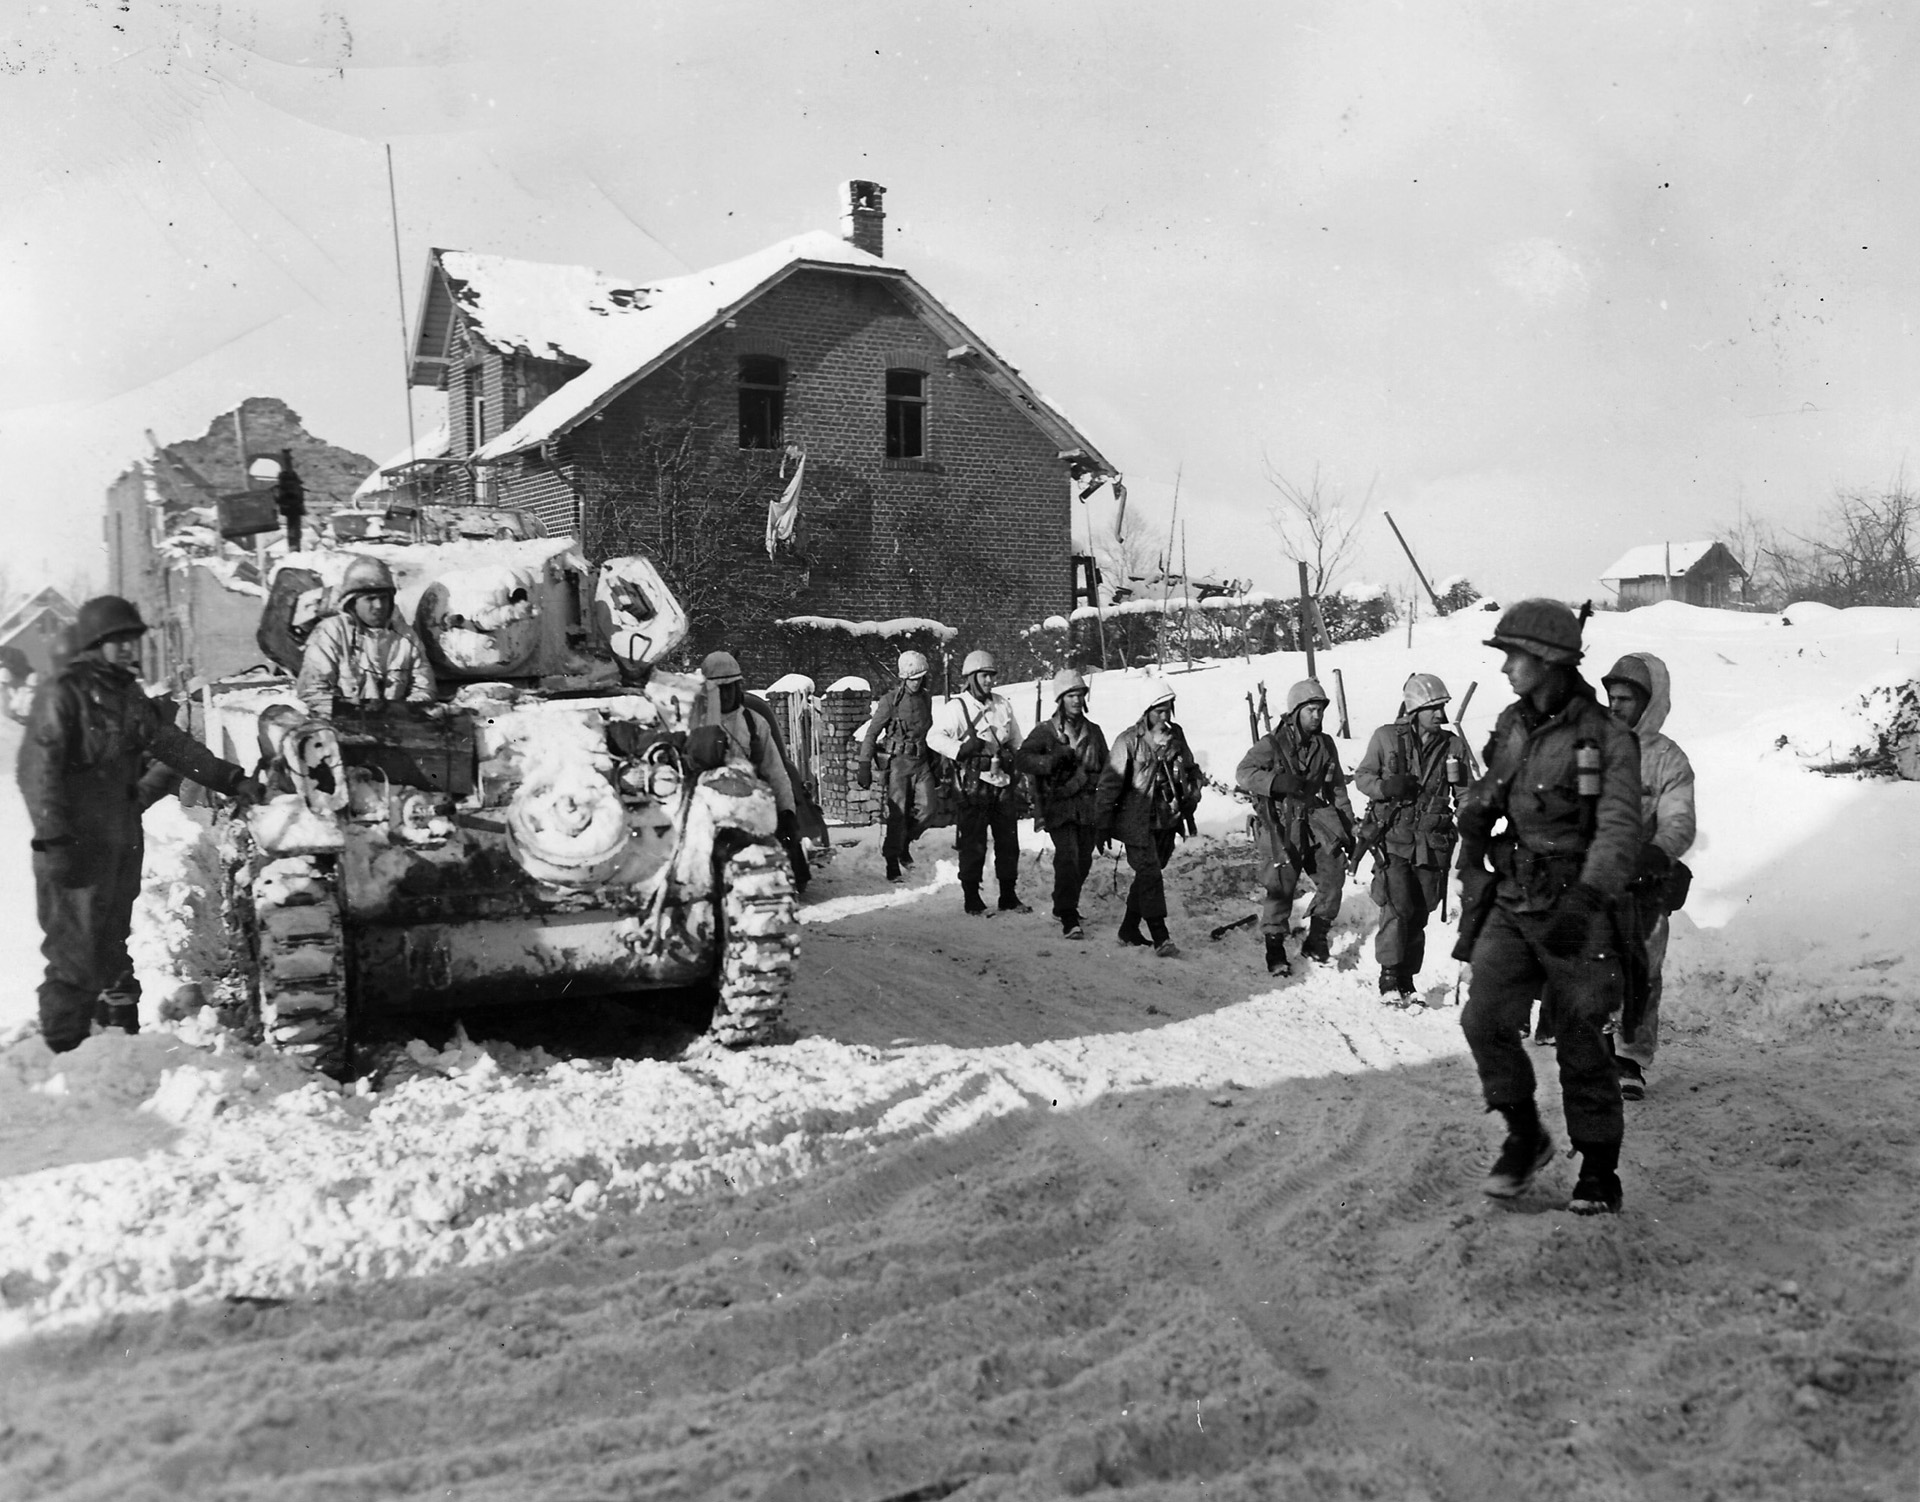 Troopers of the 509th Parachute Infantry Regiment, 82nd Airborne Division, trudge past an M5A Stuart light tank during fighting around the French village of St. With. The 509th suffered 49 casualties at Parker’s Crossroads.